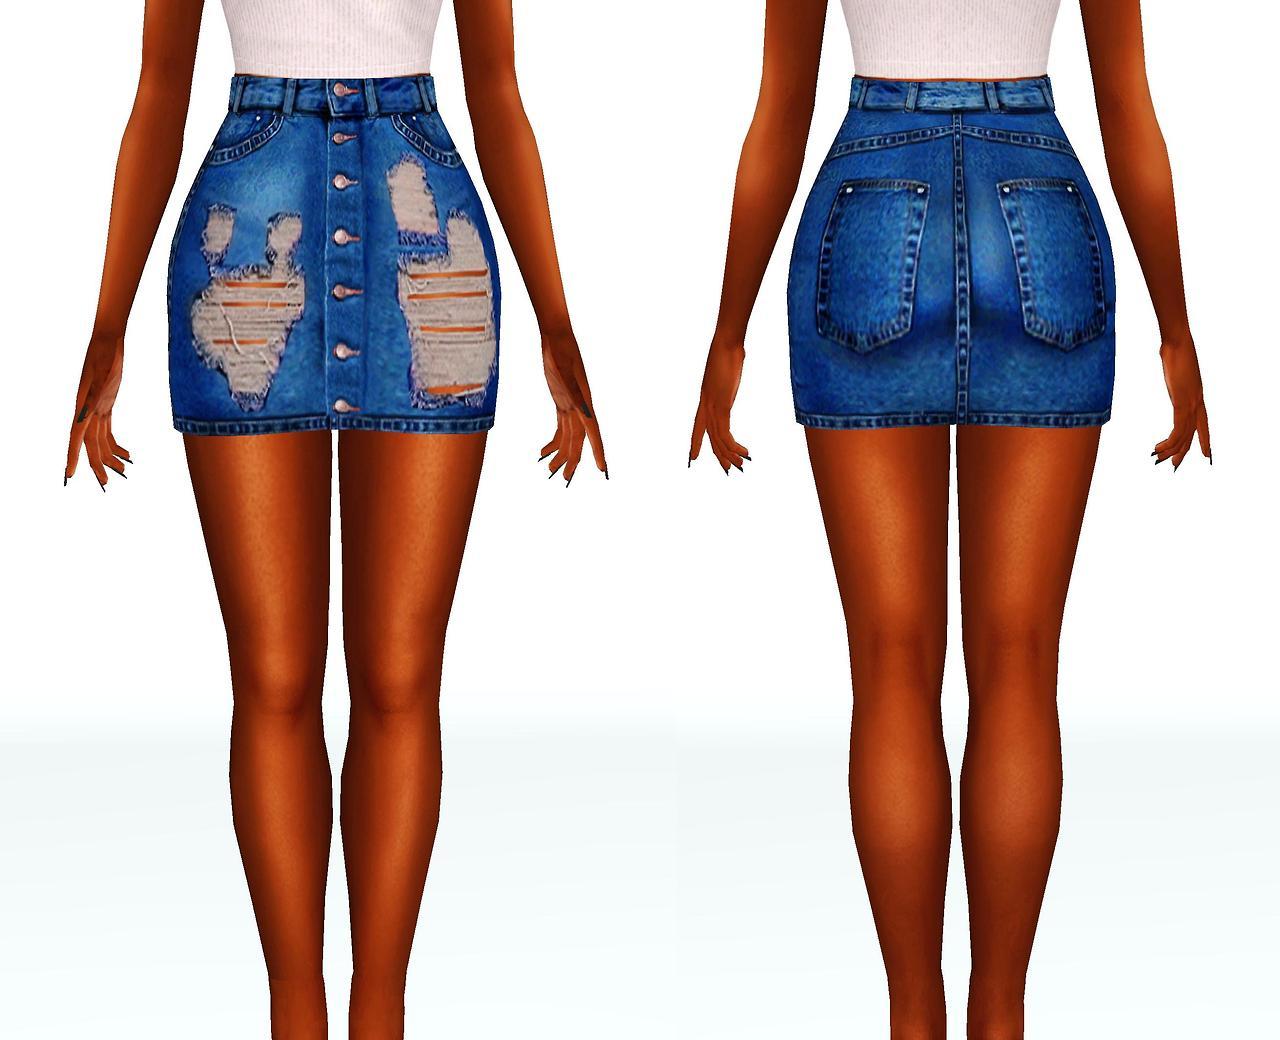 Savage Sims Cinch Skirt & Milf Skinnies Converted To Sims 3• All credit goes to @savage-sims• These may not go well with longer tops• They have morphs• I included 45 designs split into two files for the skirt• I included 25 designs split into...